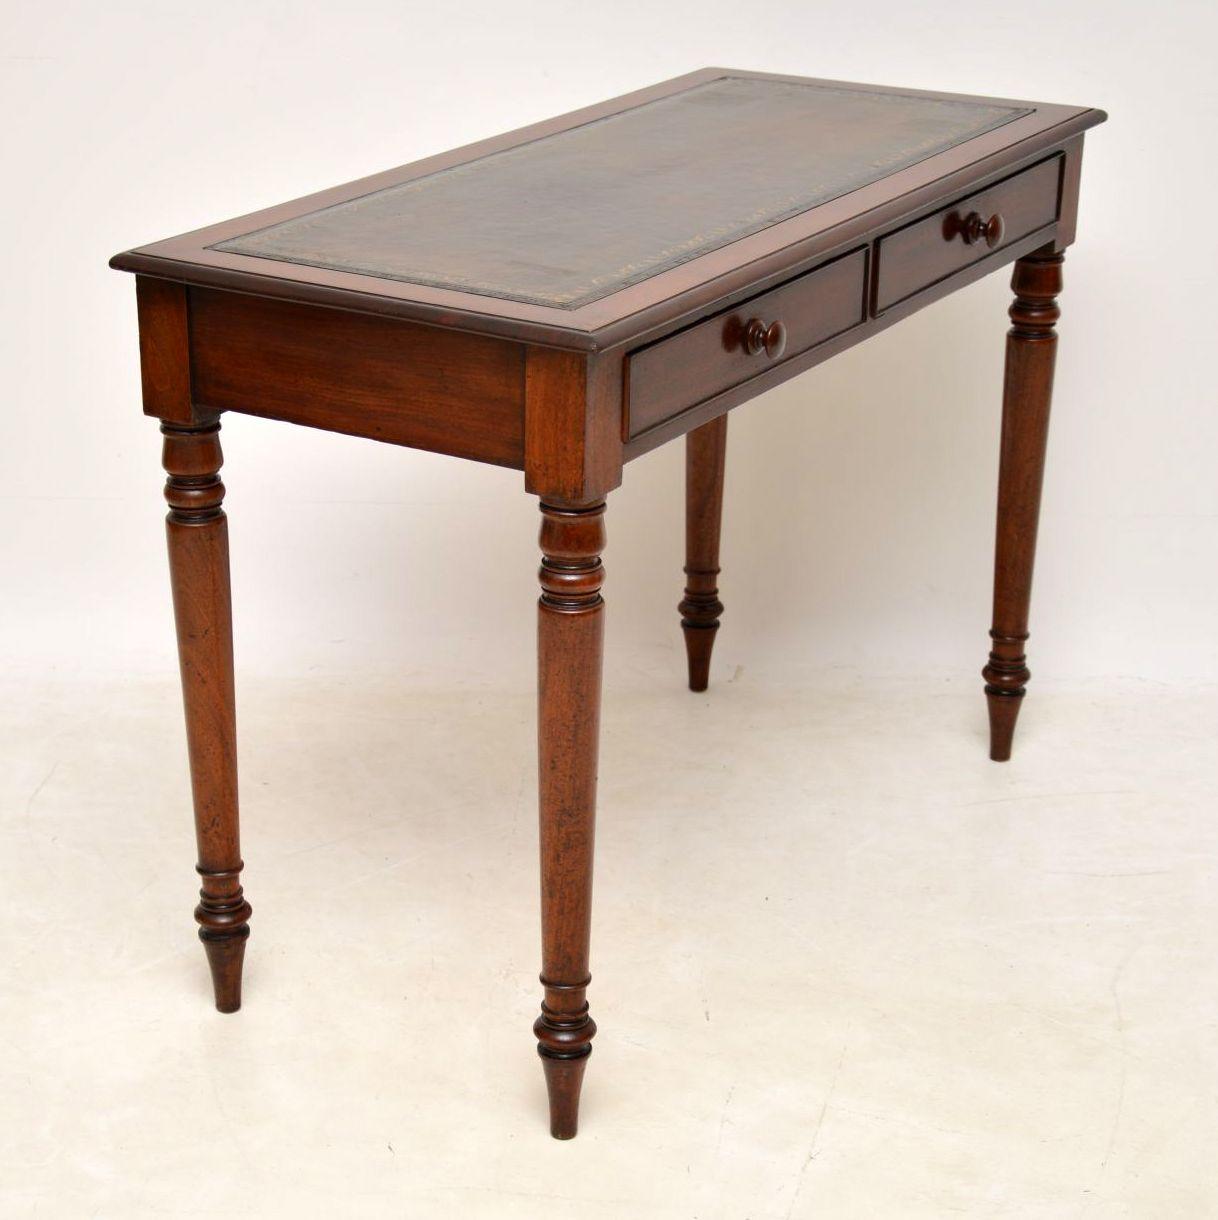 Antique Victorian Mahogany Leather Top Writing Table im Zustand „Gut“ in London, GB